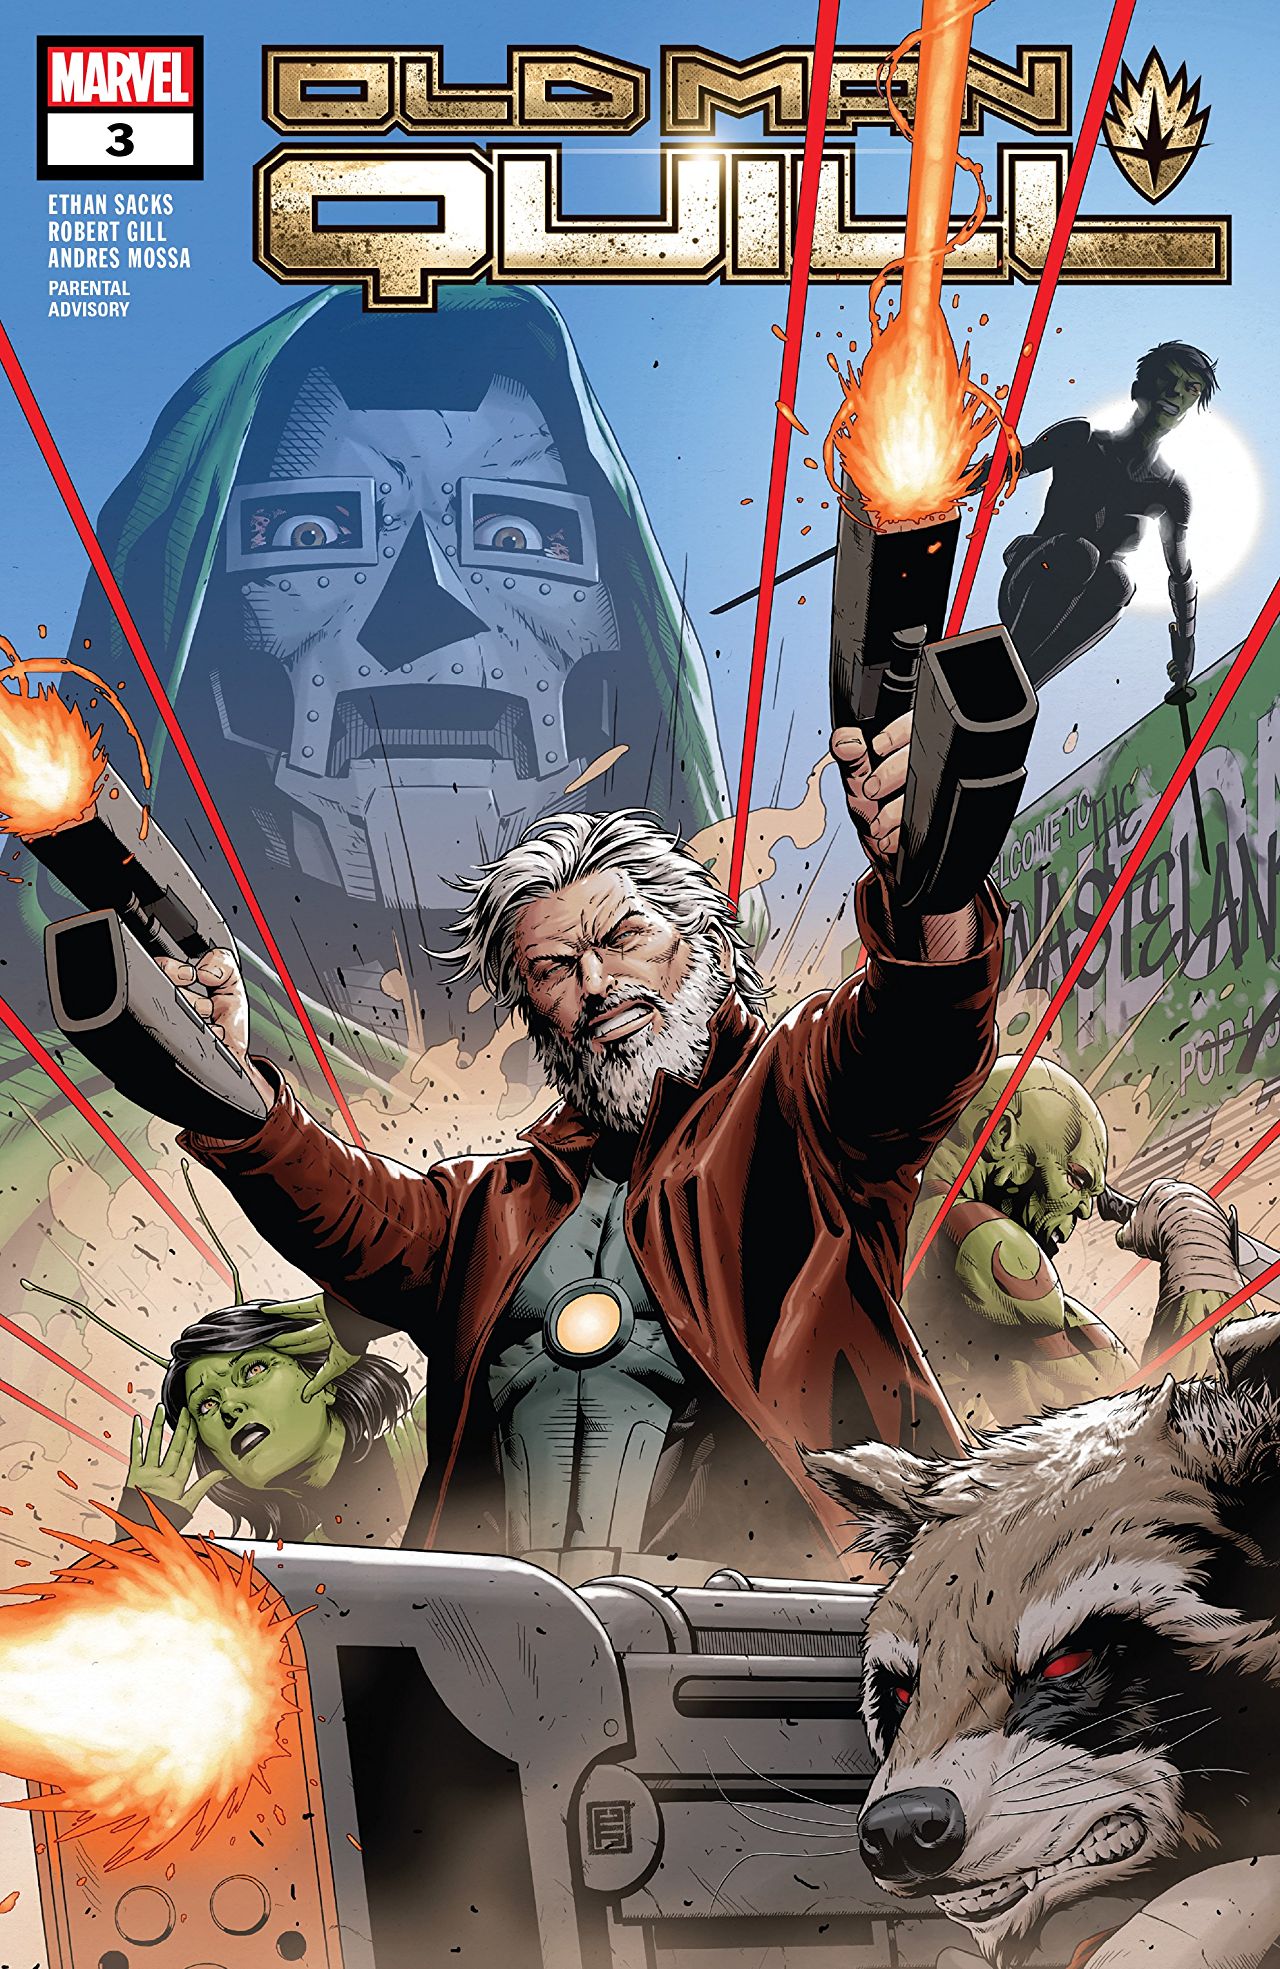 Marvel Preview: Old Man Quill #3